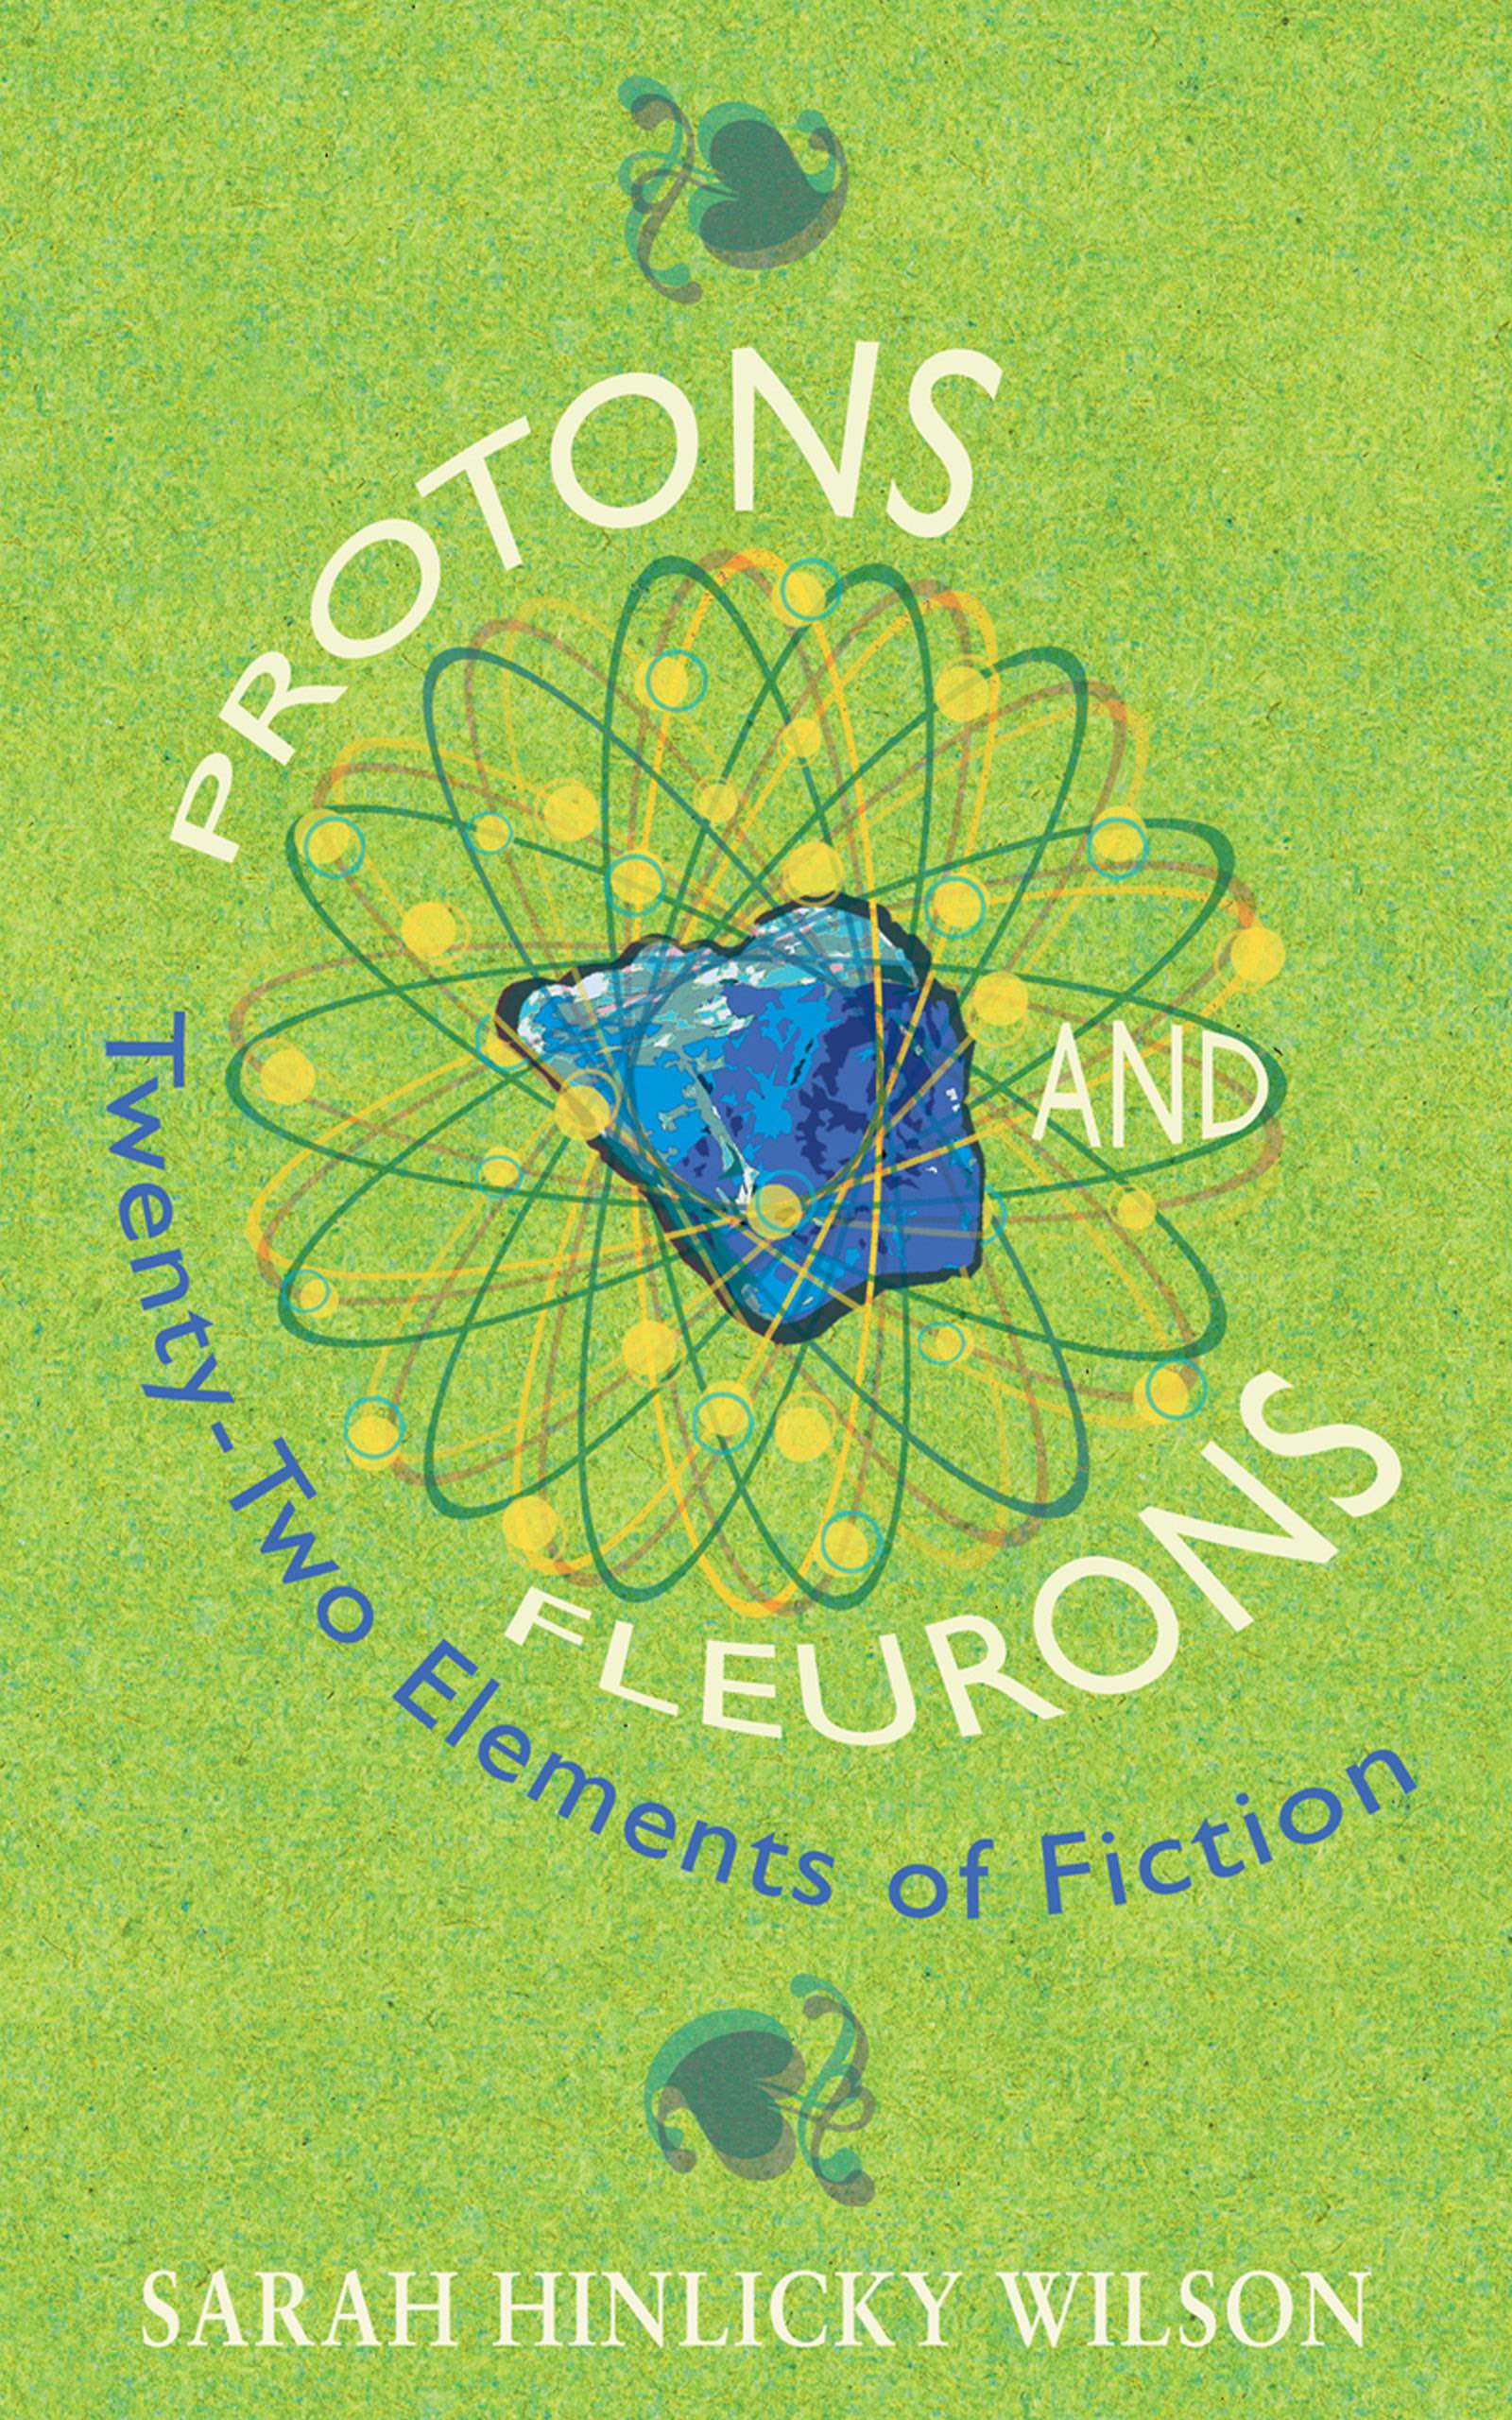 Protons and Fleurons